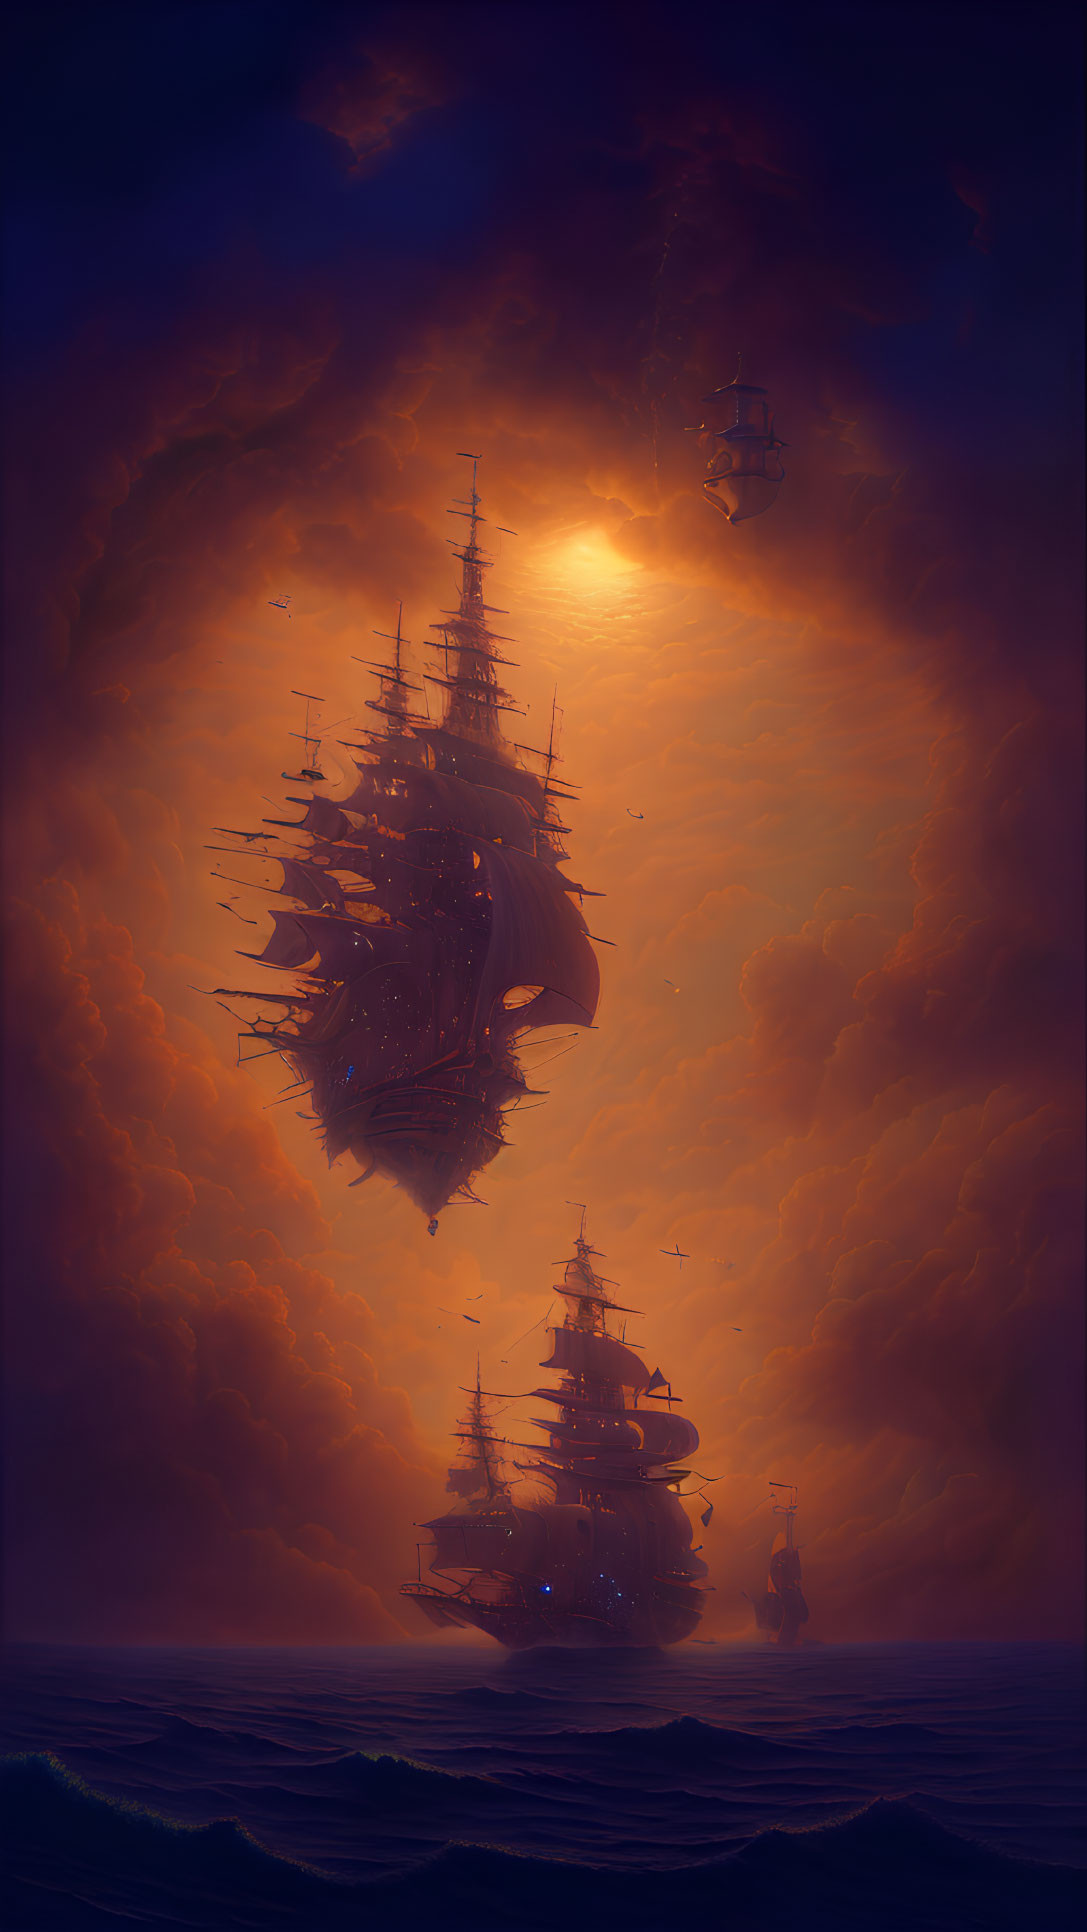 Sailing ships in surreal orange sky with swirling clouds